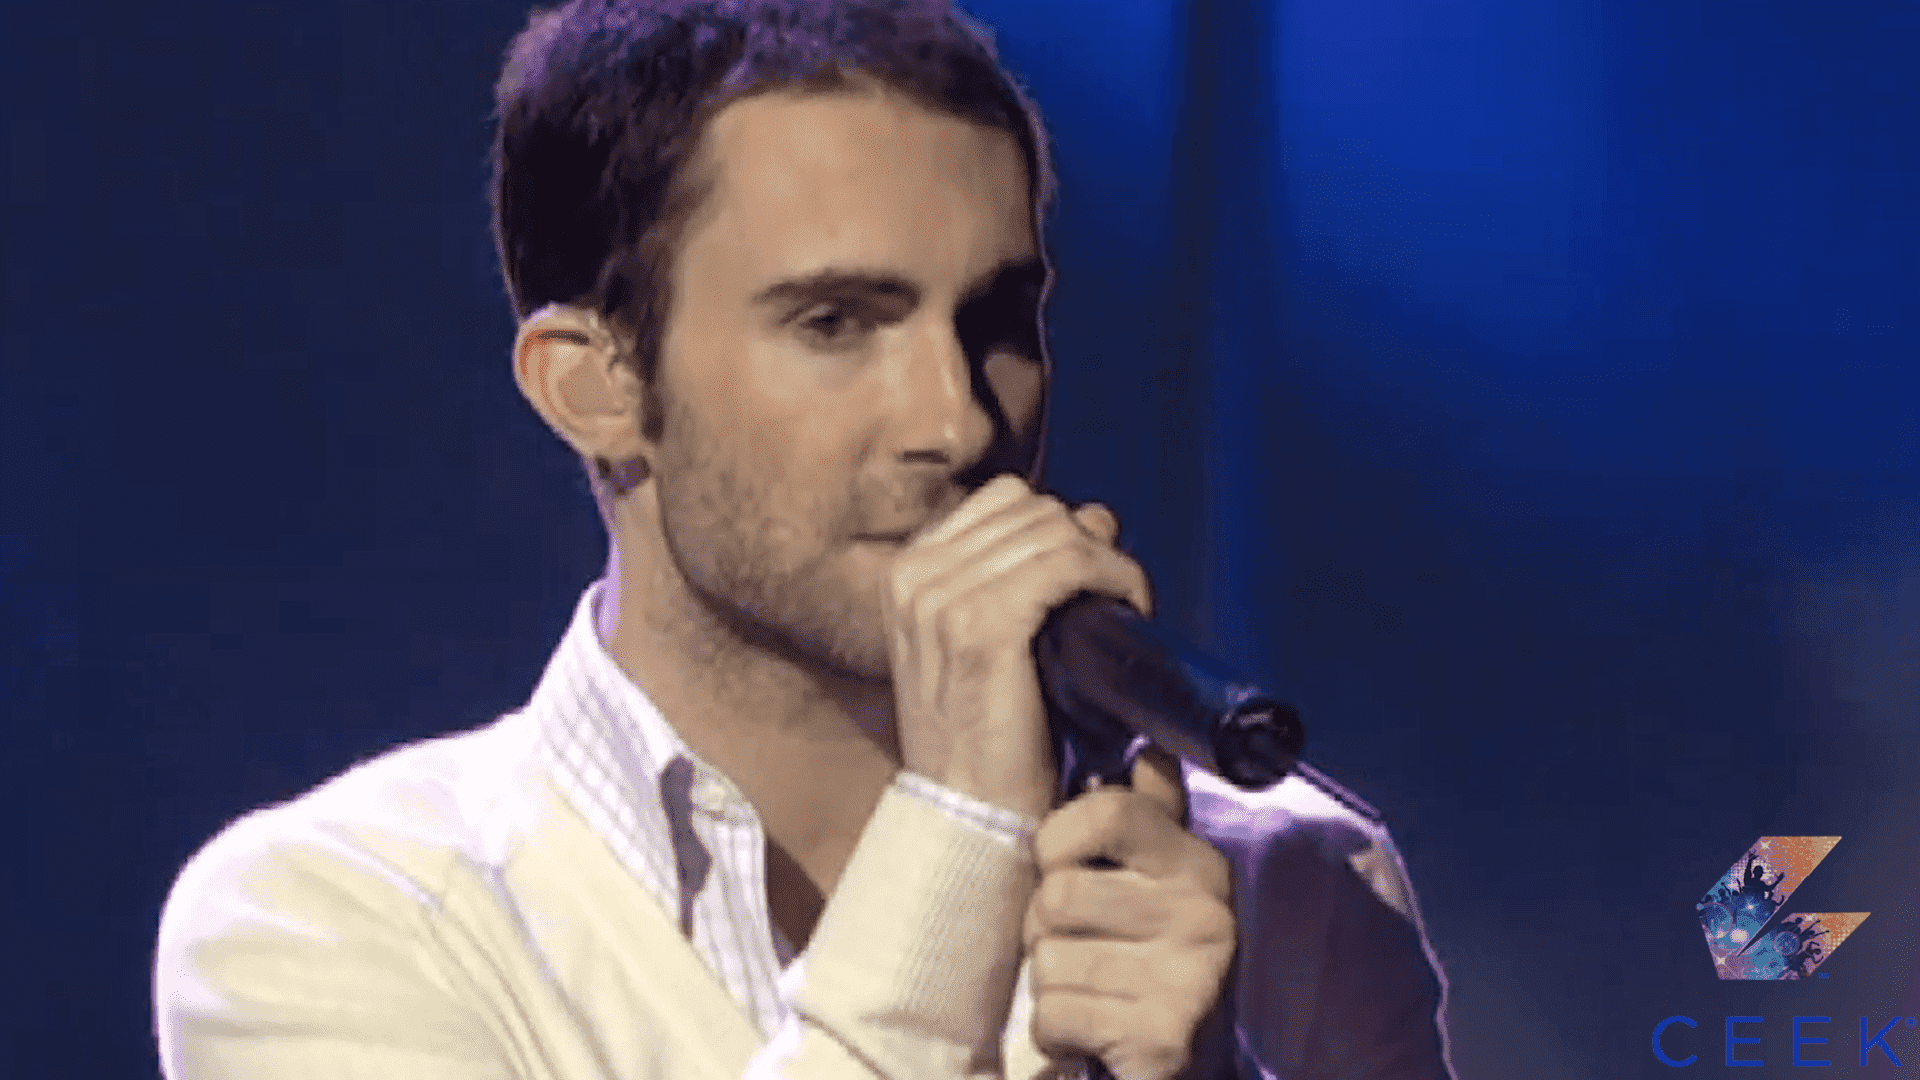 Maroon 5, World Music Awards Maroon 5 Perform She Will Be Loved at the World Music Awards